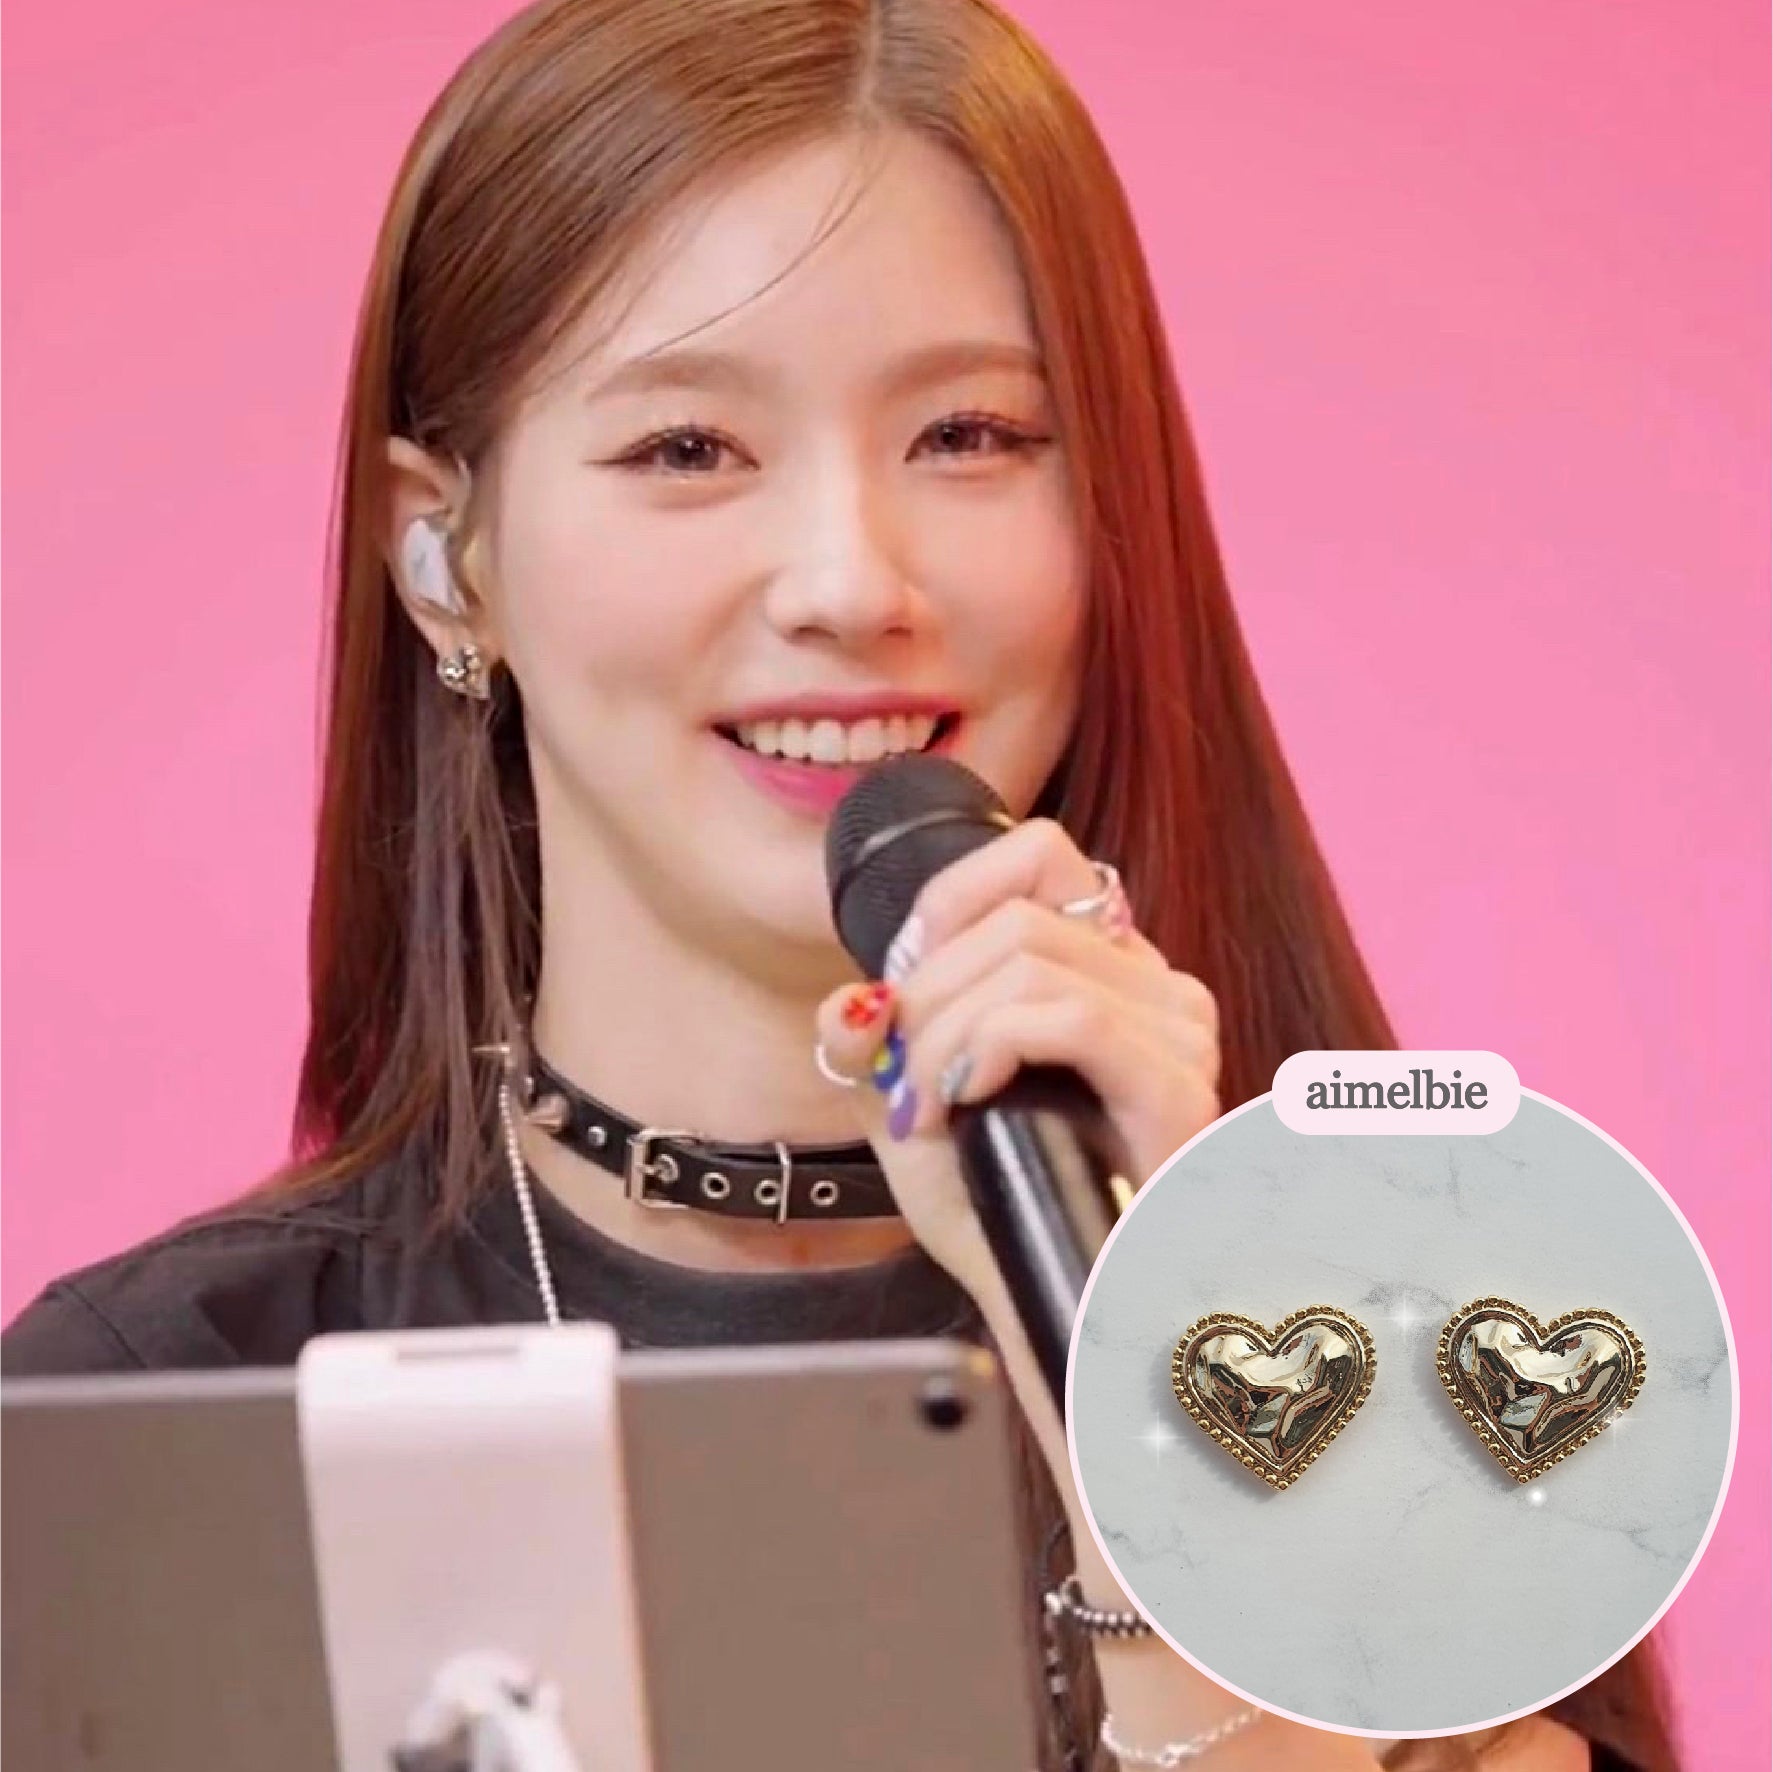  Gold Laced Hearts Piercing (G-idle Miyeon, IVE Yujin, Oh My Girl Seunghee, Arin, Hyojung Piercing)